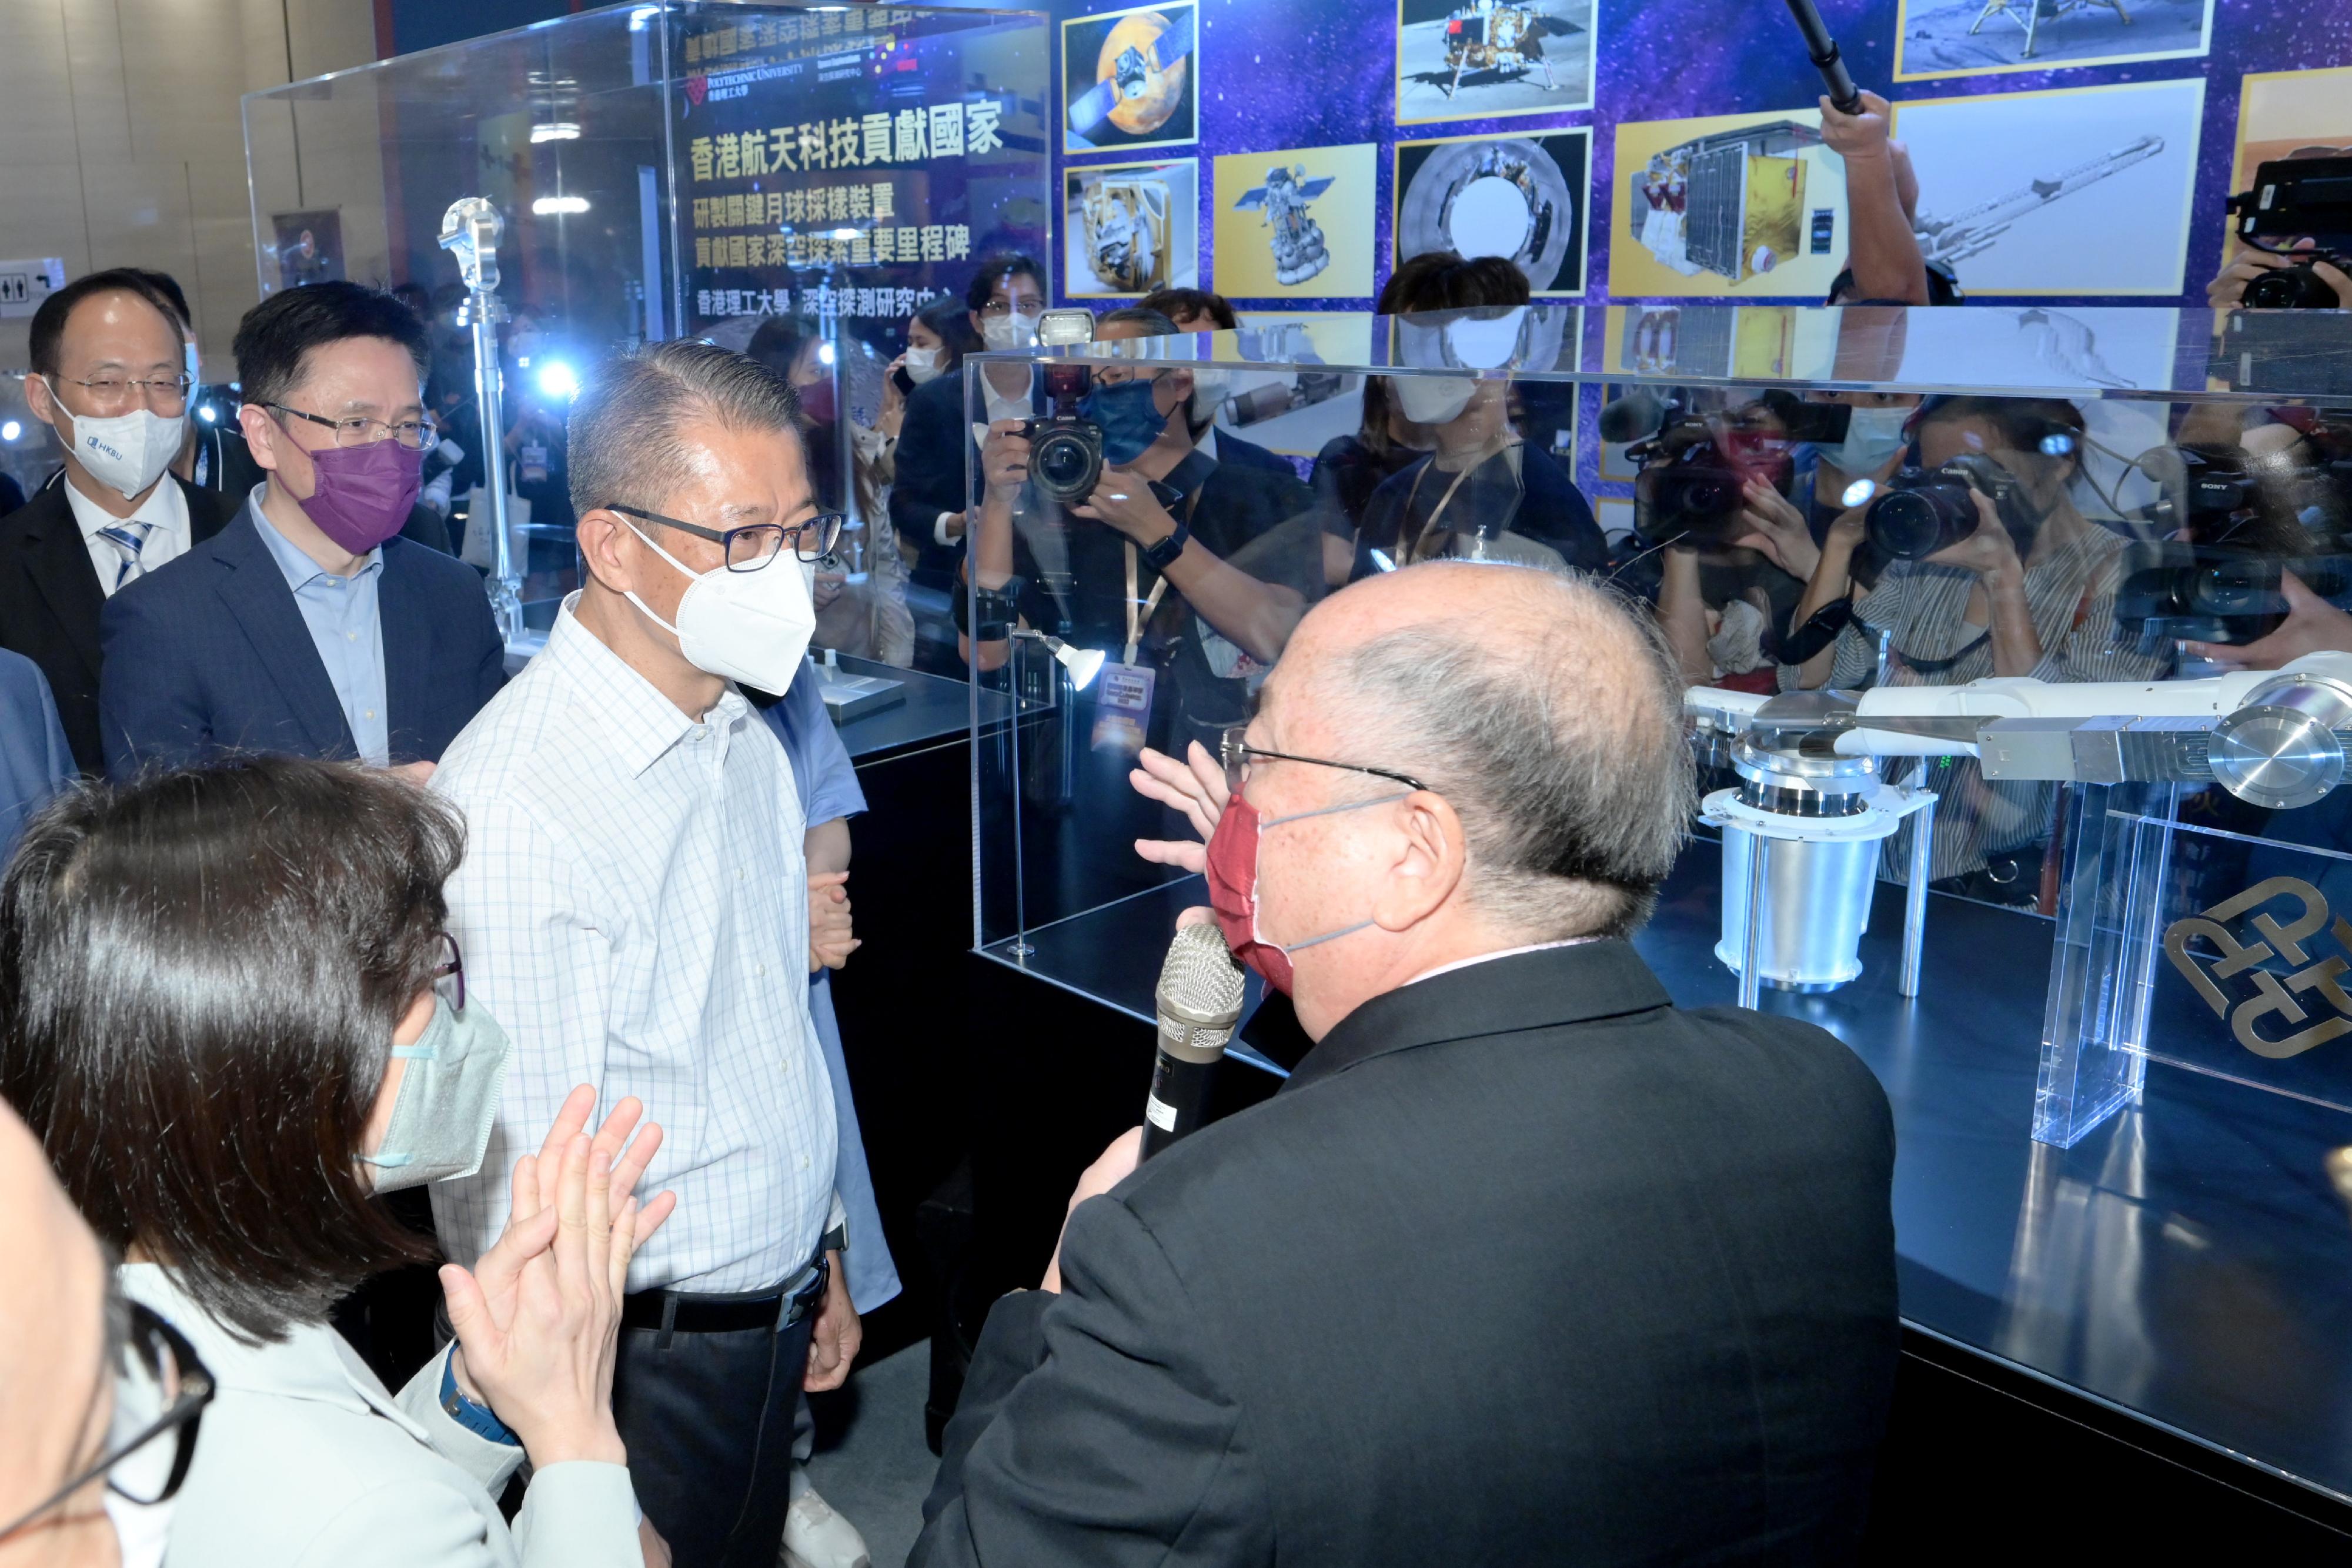 The Financial Secretary, Mr Paul Chan, attended the opening ceremony of InnoCarnival 2022 today (October 22). Photo shows Mr Chan (second right), and the Secretary for Innovation, Technology and Industry, Professor Sun Dong (third right), visiting the Aerospace Showcase, which features precision space instruments locally developed and fabricated by the Hong Kong Polytechnic University.